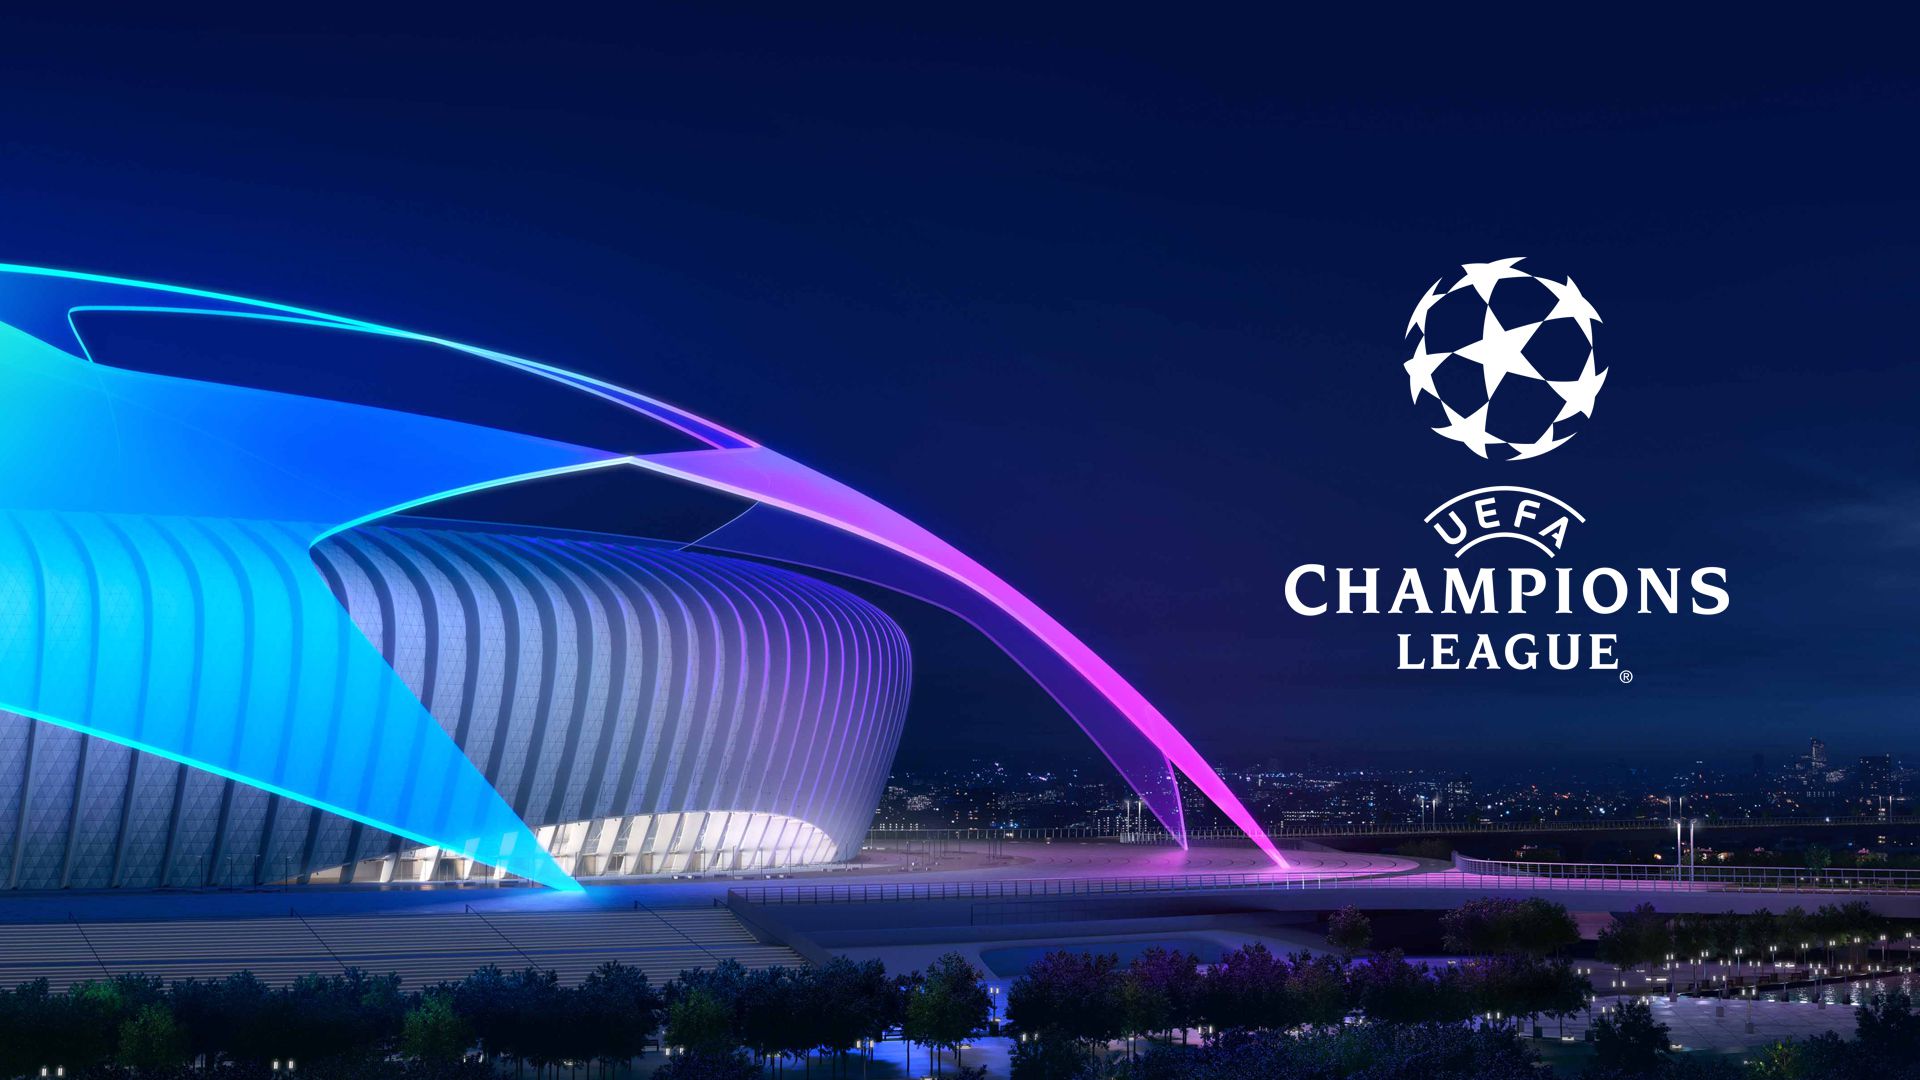 Article about the Champions League